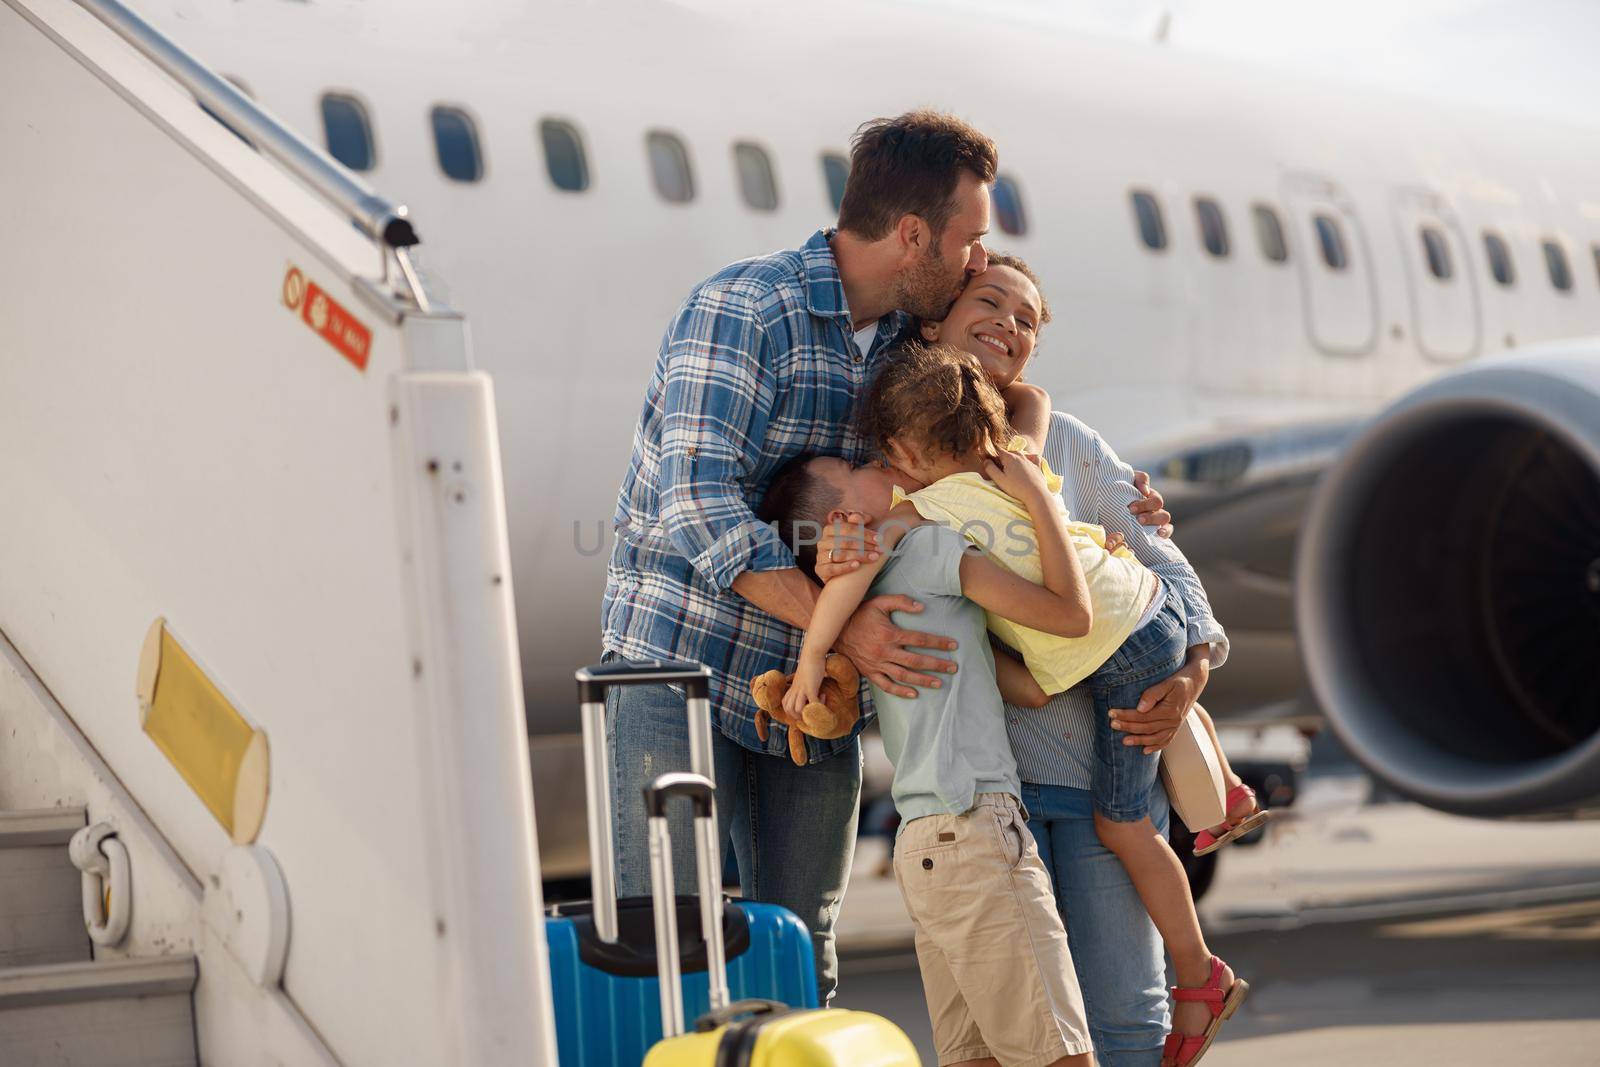 Family of four kissing each other while going on a trip, standing in front of big airplane outdoors. People, traveling, vacation concept